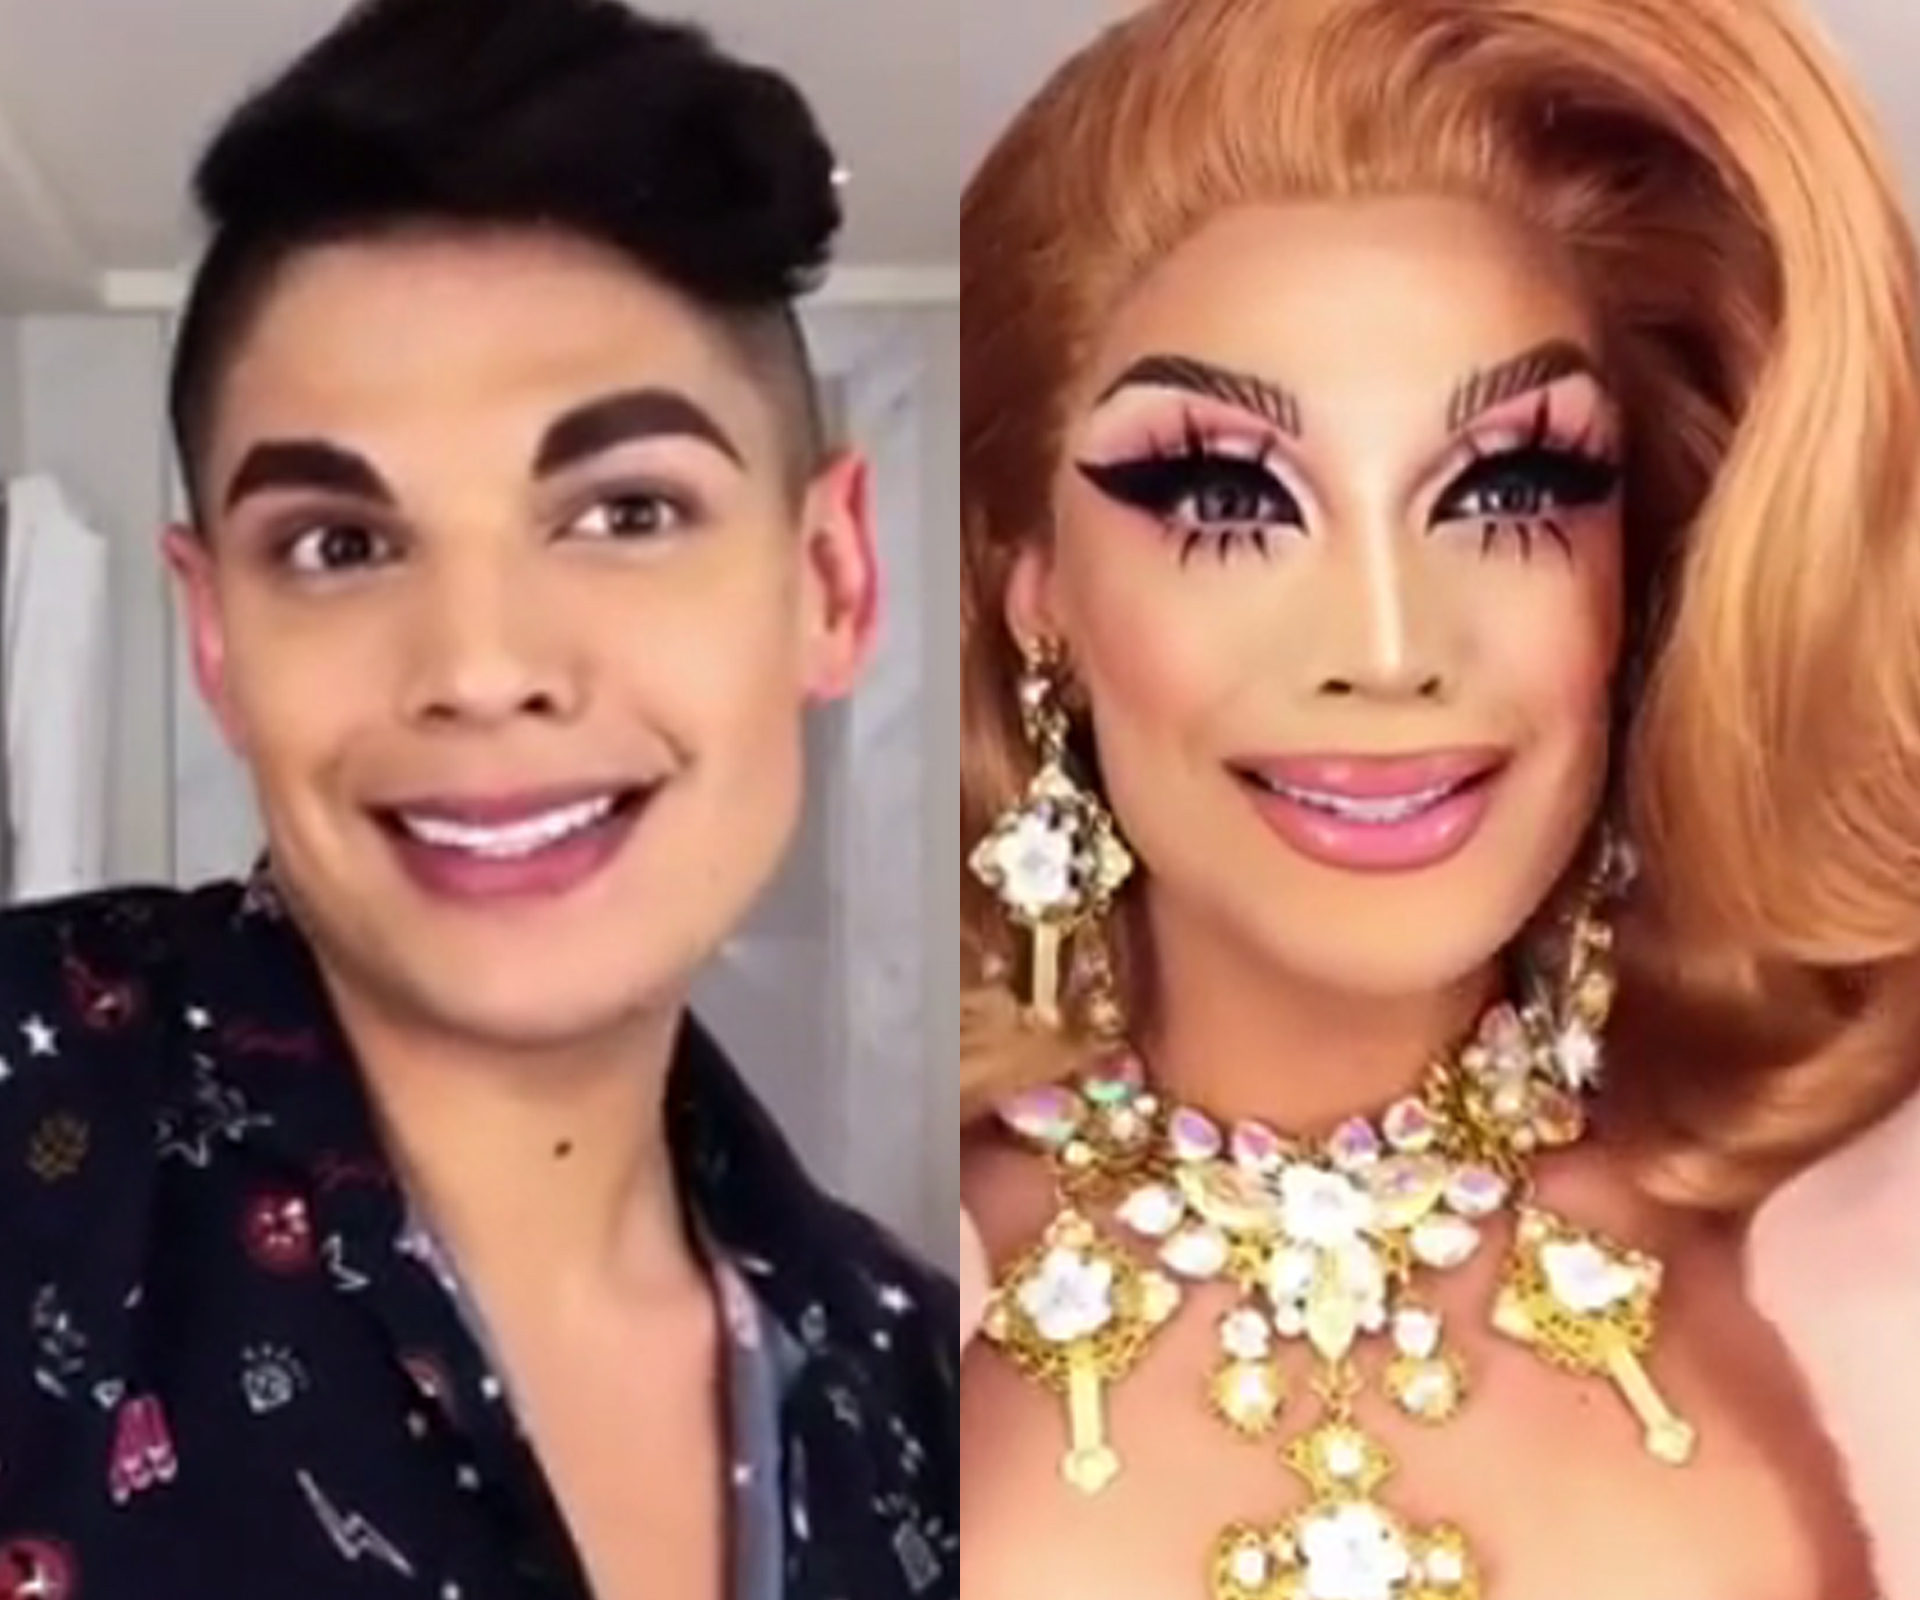 A drag queen shares her makeup routine